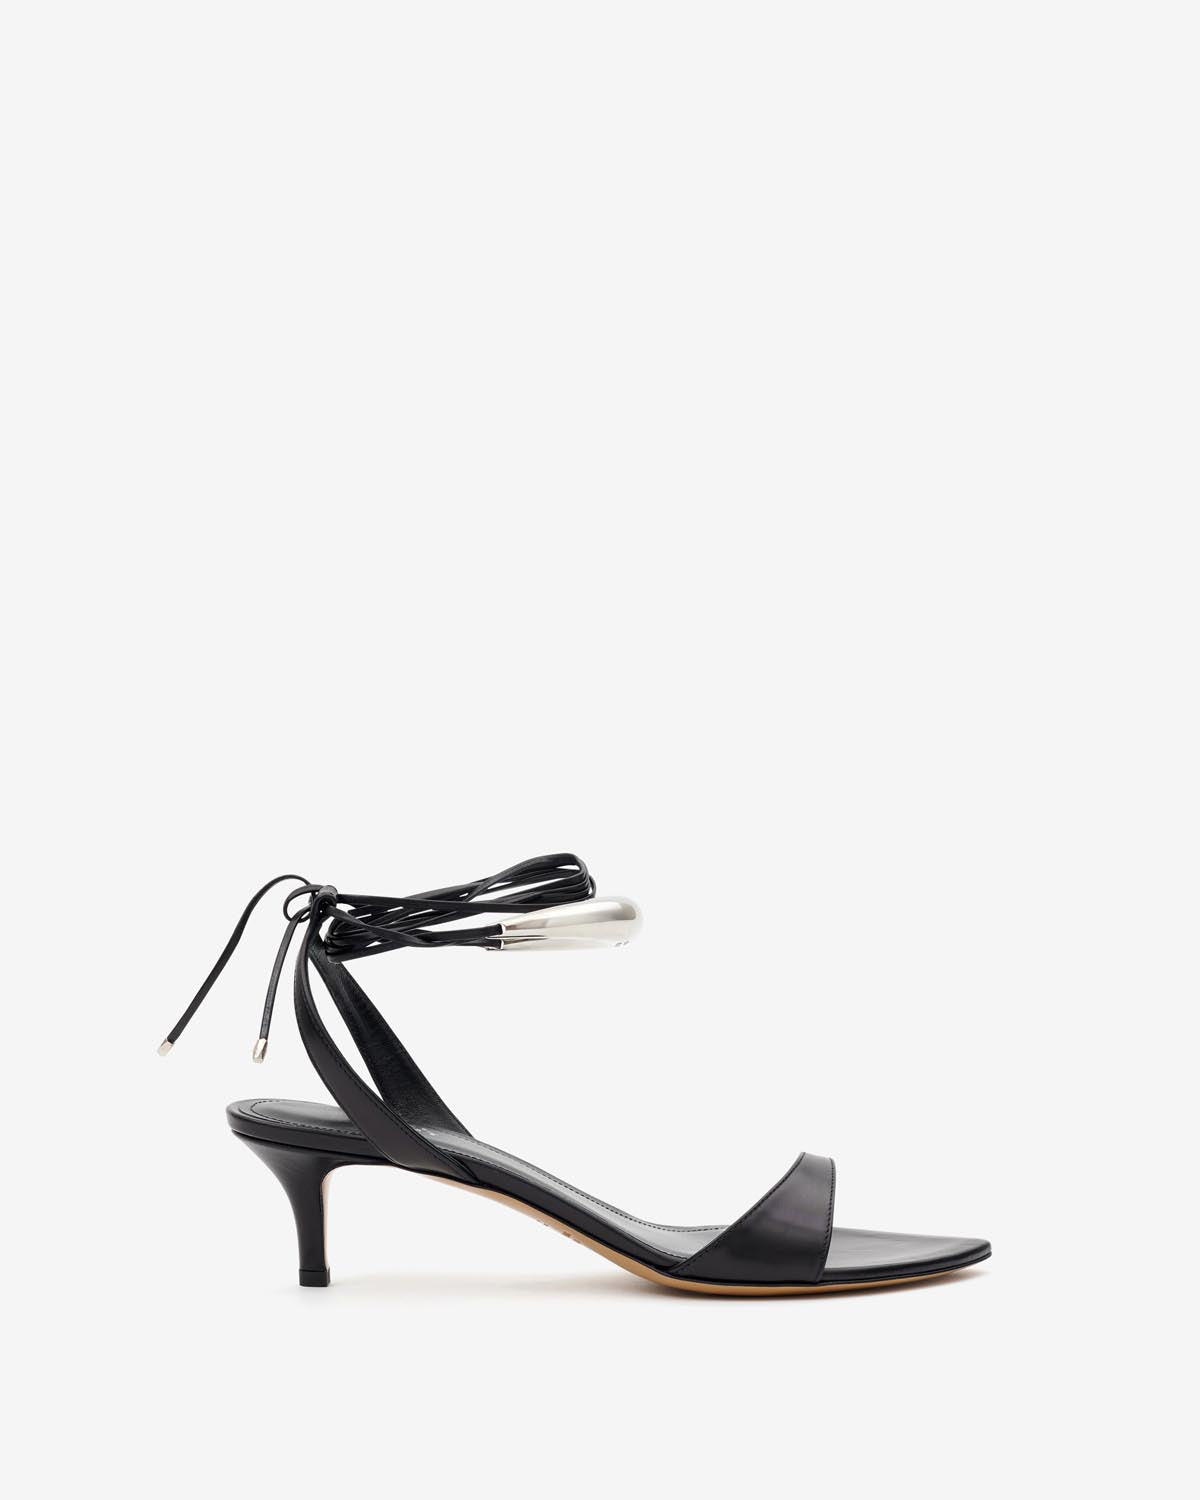 Alziry sandals Woman Black and silver 4